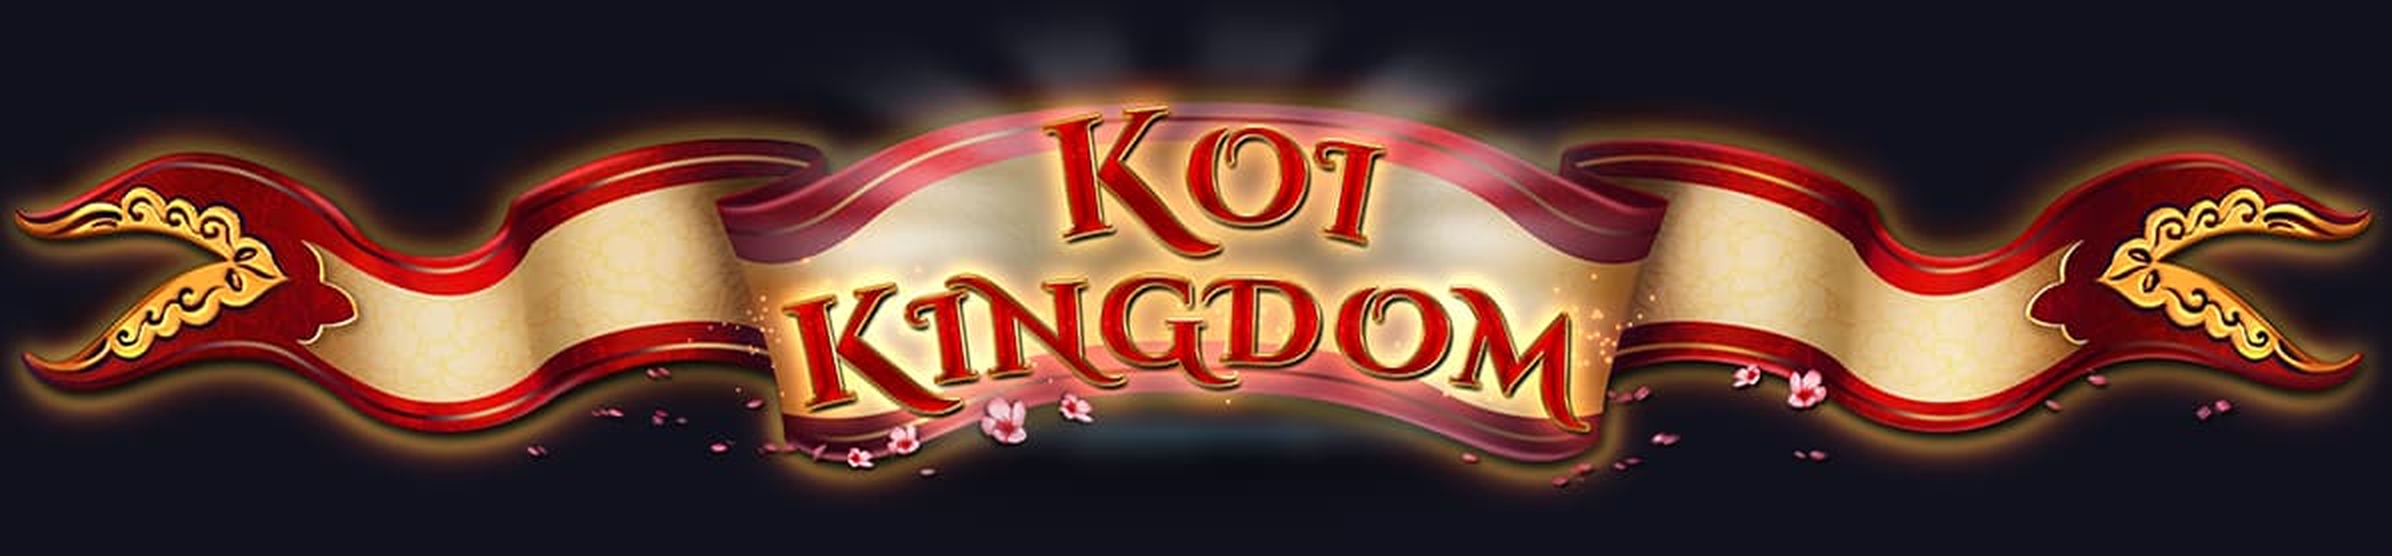 The Koi Kingdom Online Slot Demo Game by BF Games